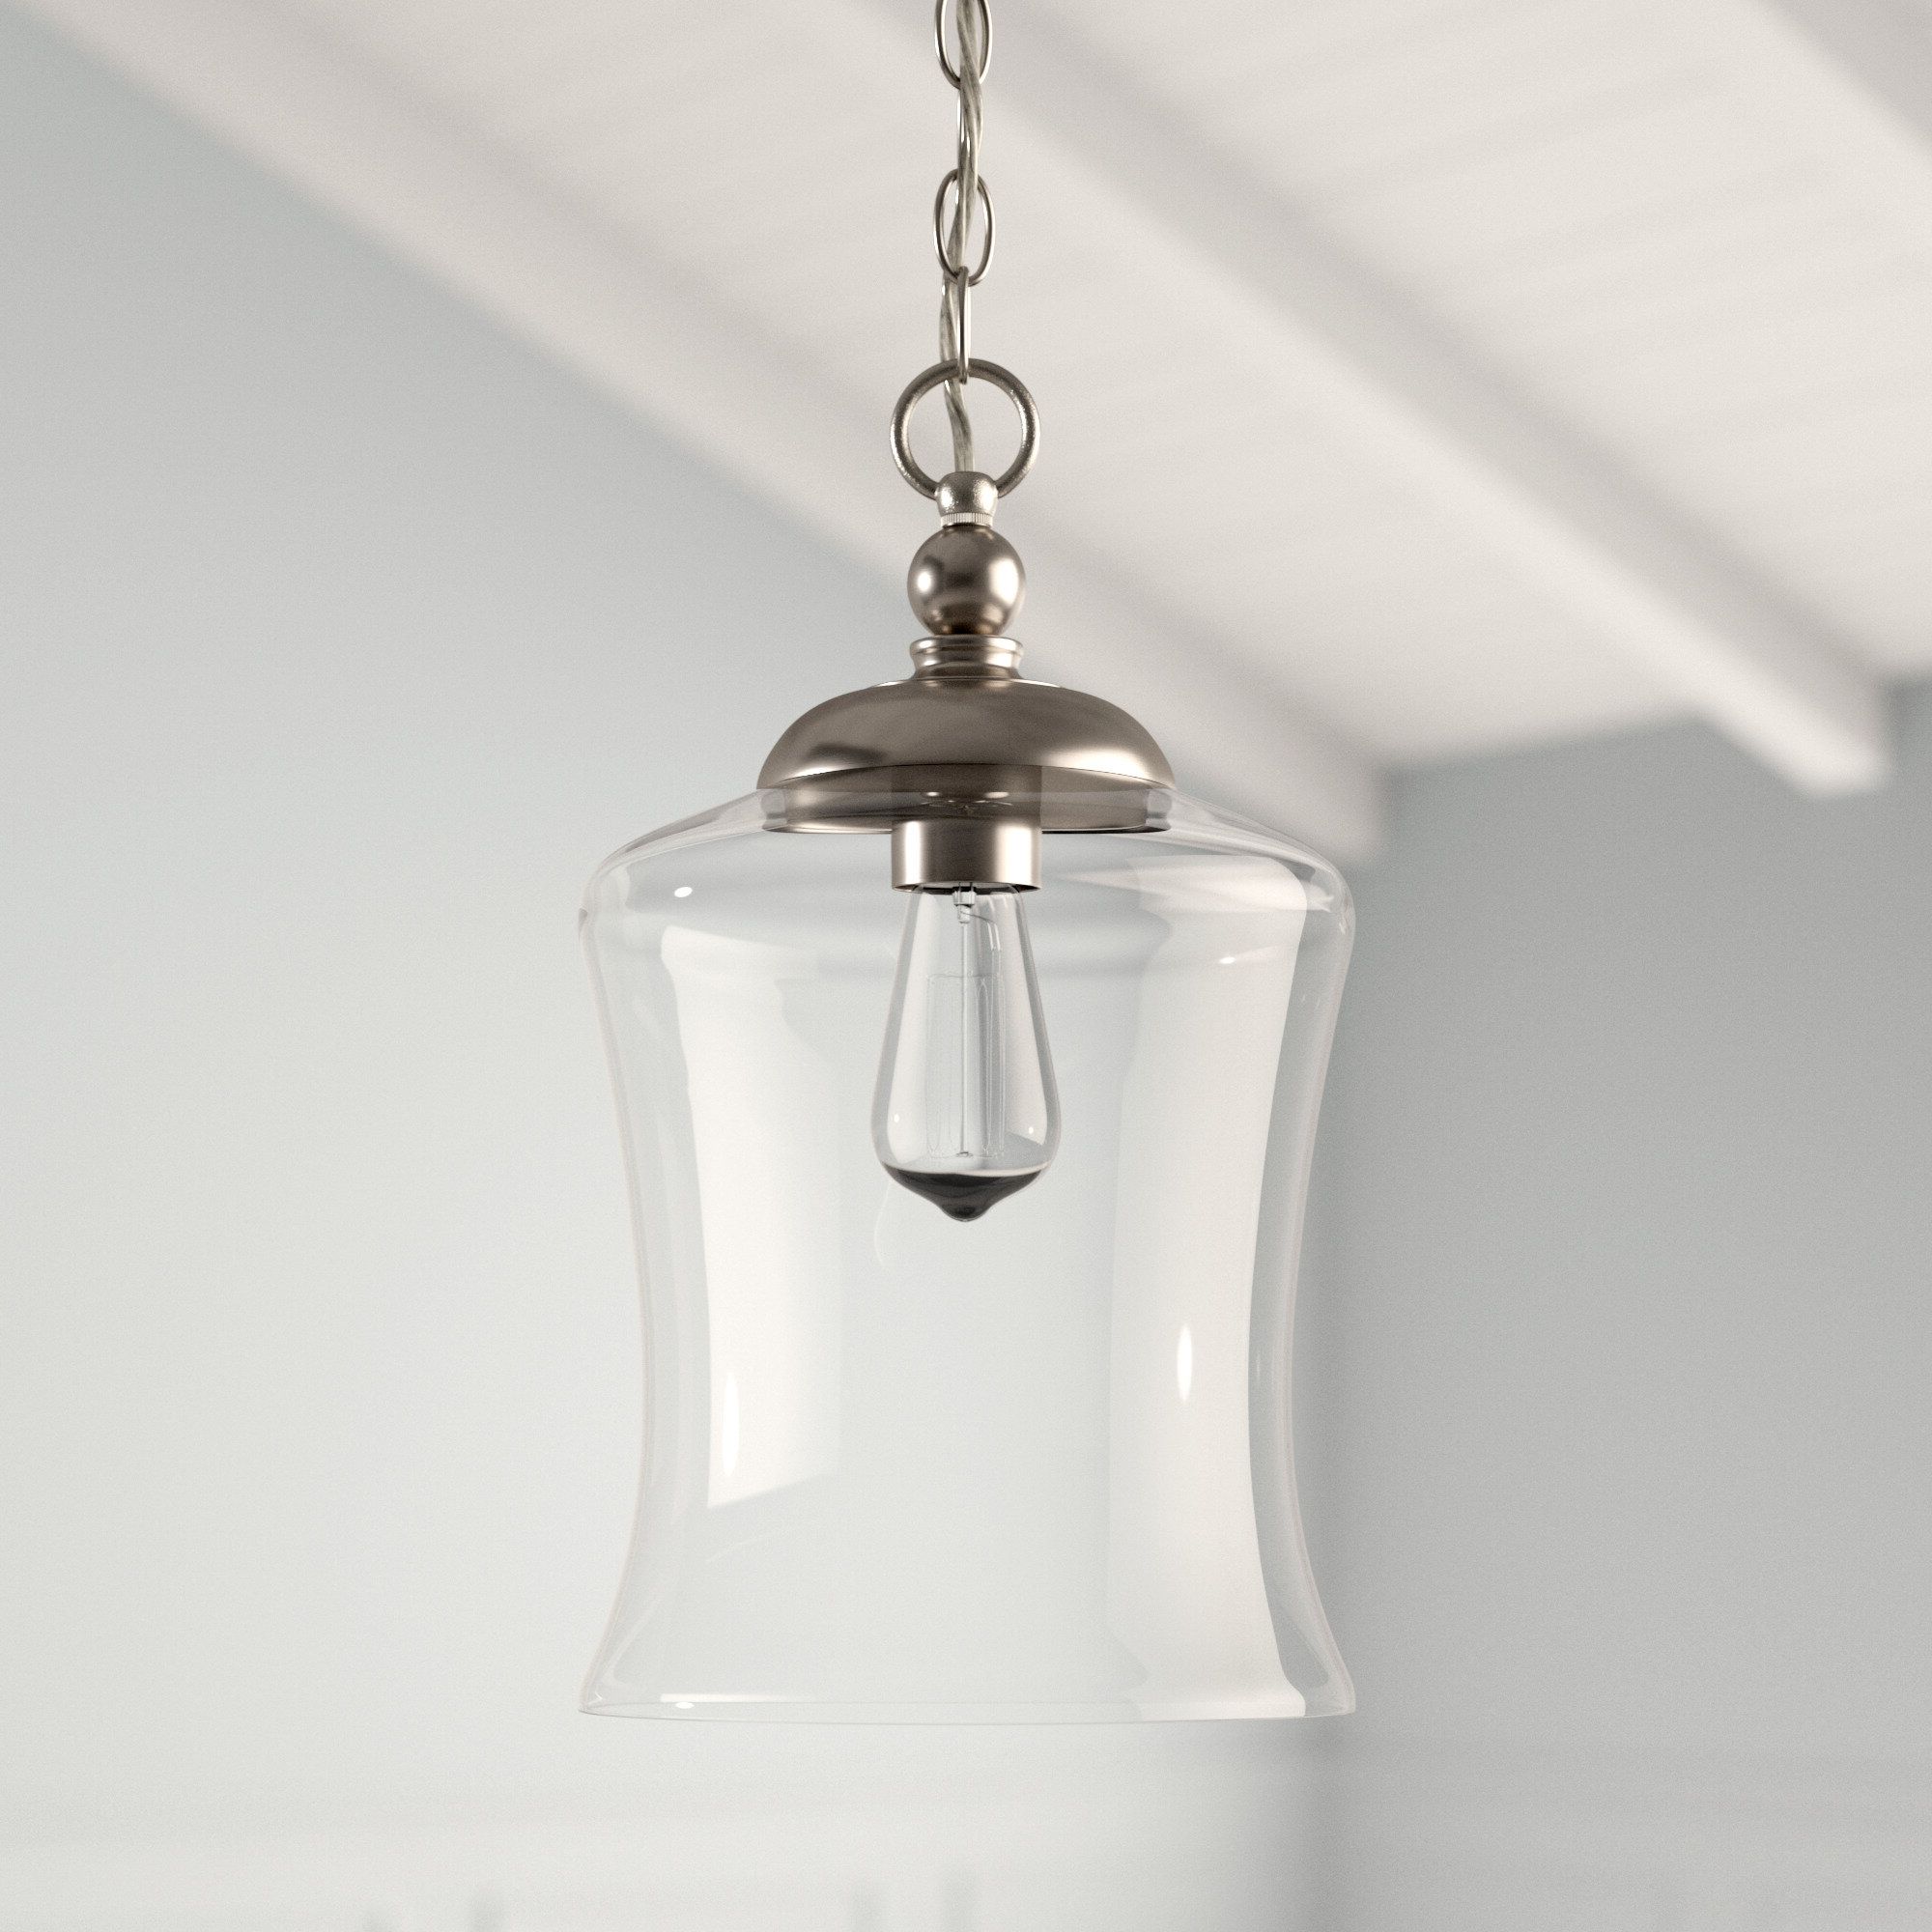 Wentzville 1 Light Single Bell Pendant With Widely Used Bundaberg 1 Light Single Bell Pendants (View 20 of 25)